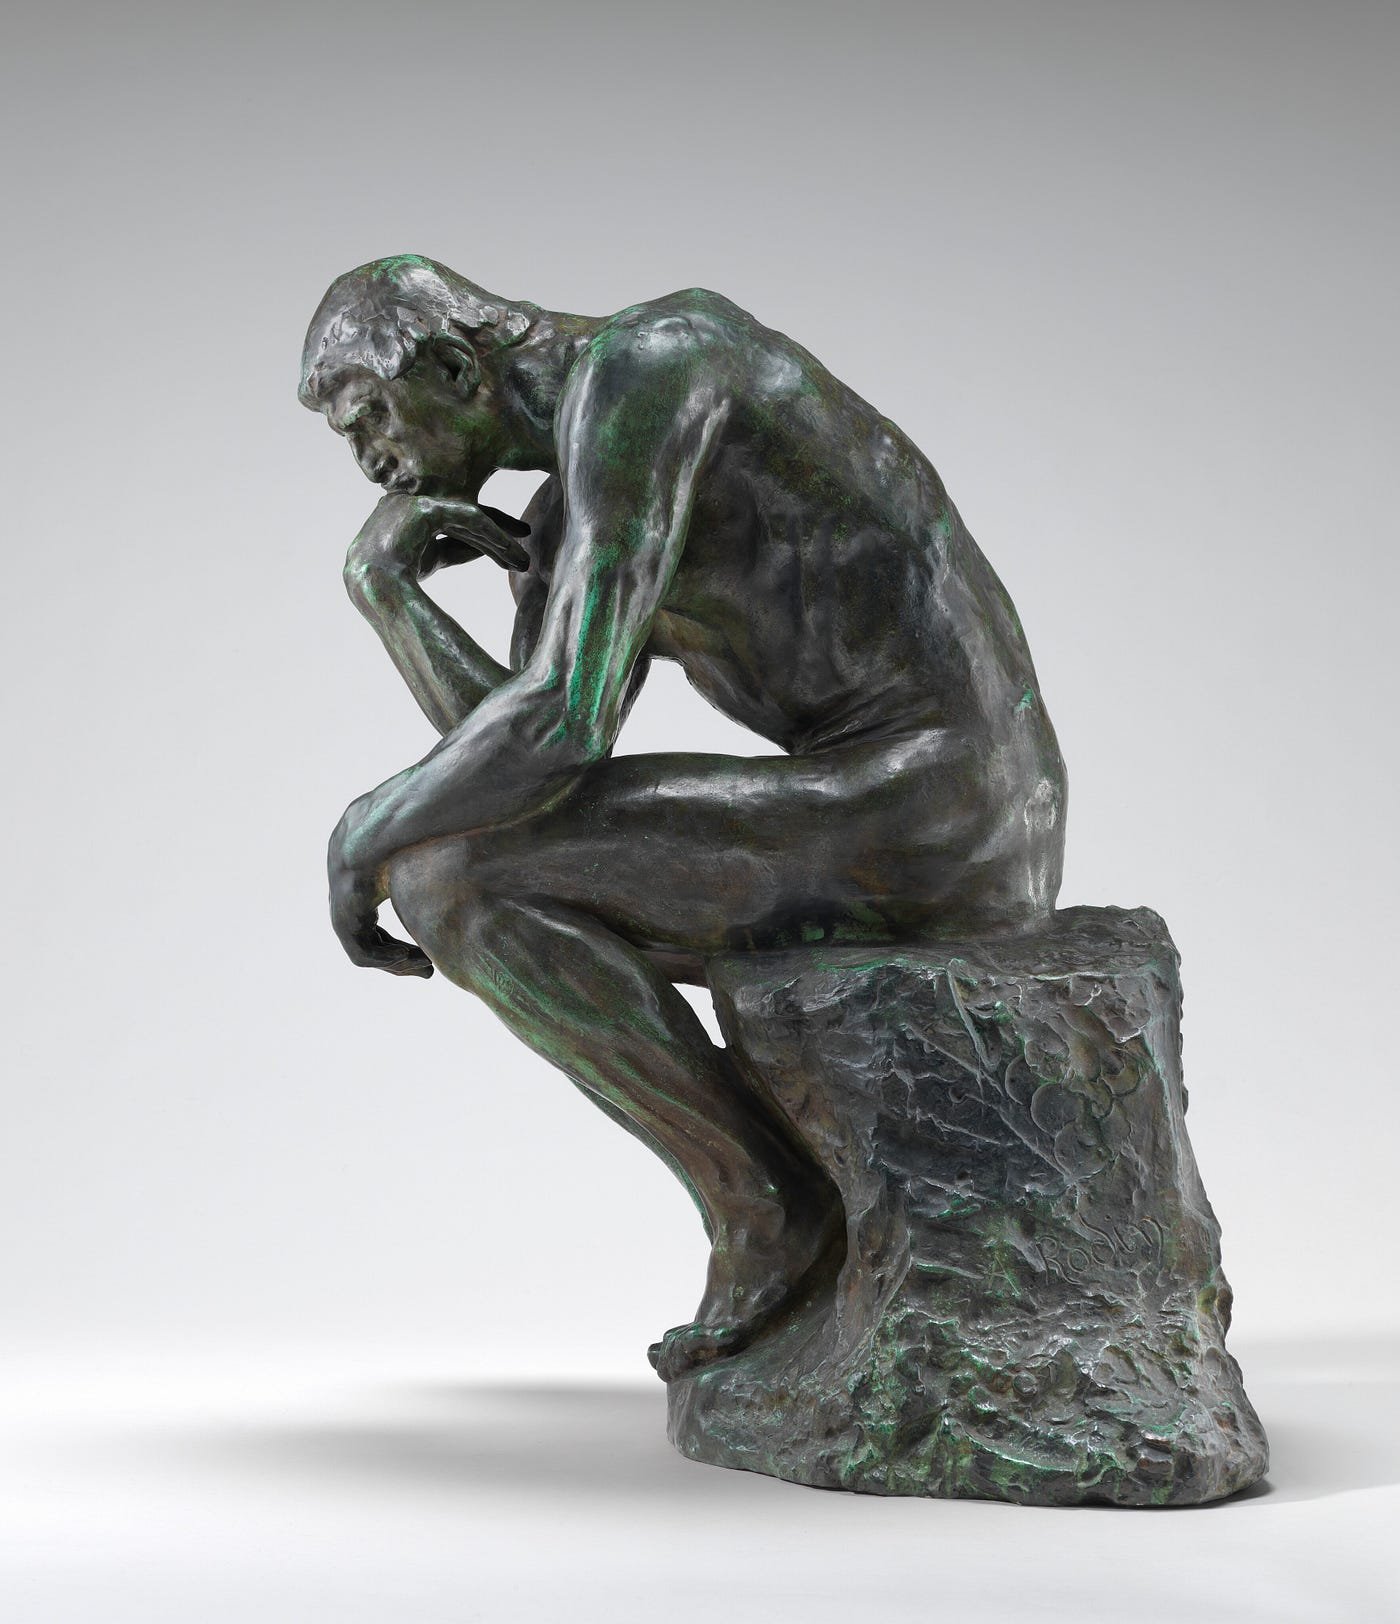 The School of Life: The Thinker Game